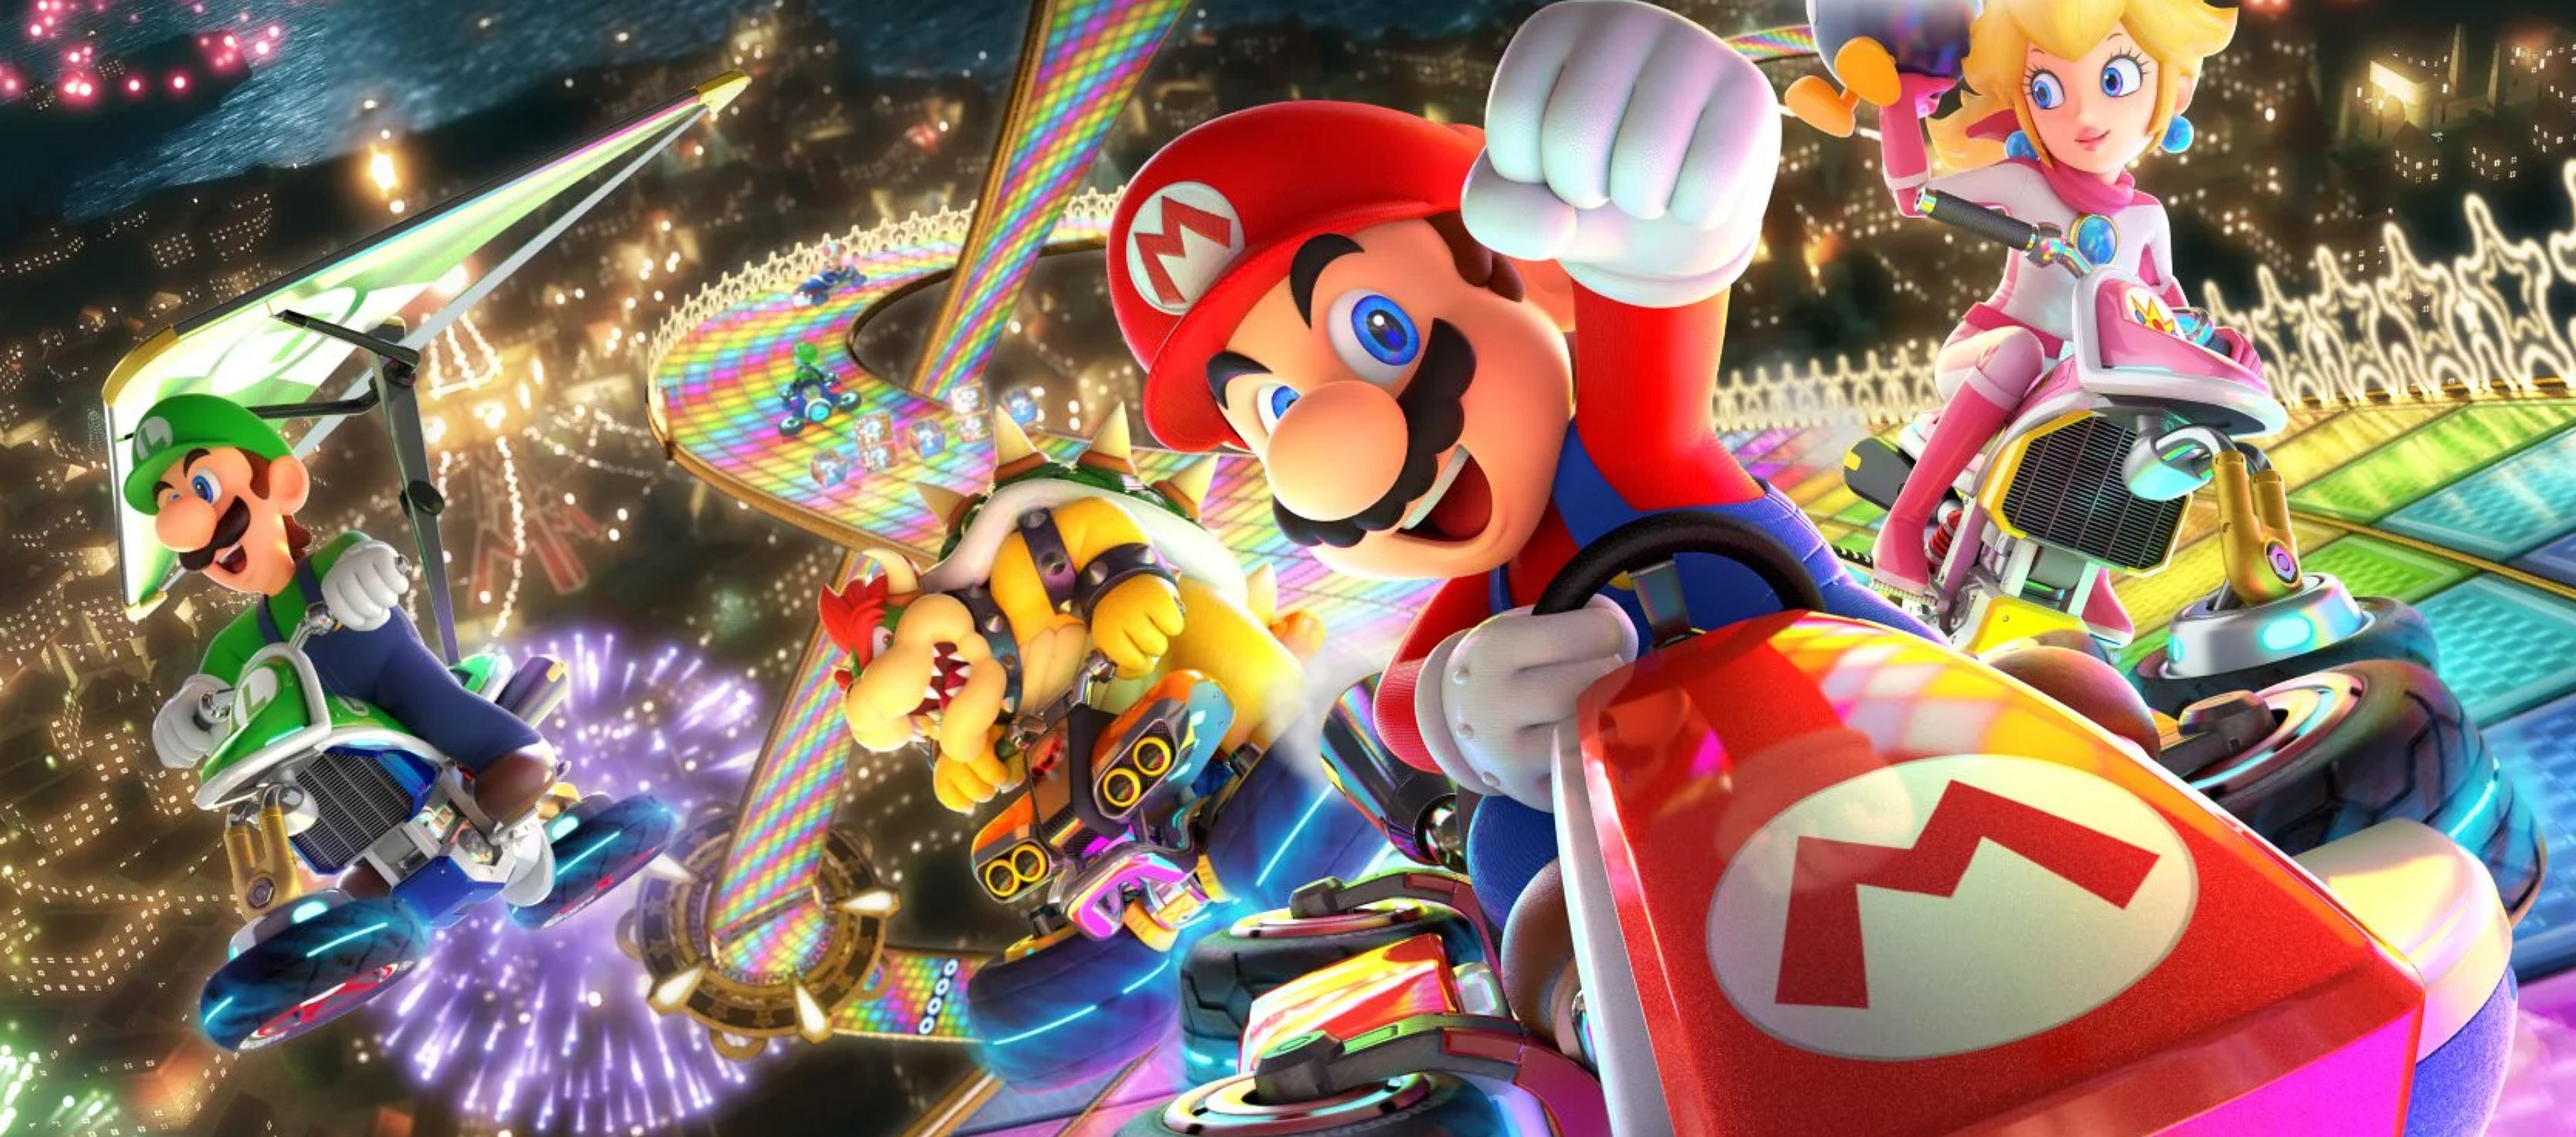 Image for Nintendo teases Mario Kart 8 Deluxe Booster Course Wave 3 by showing off two of its tracks